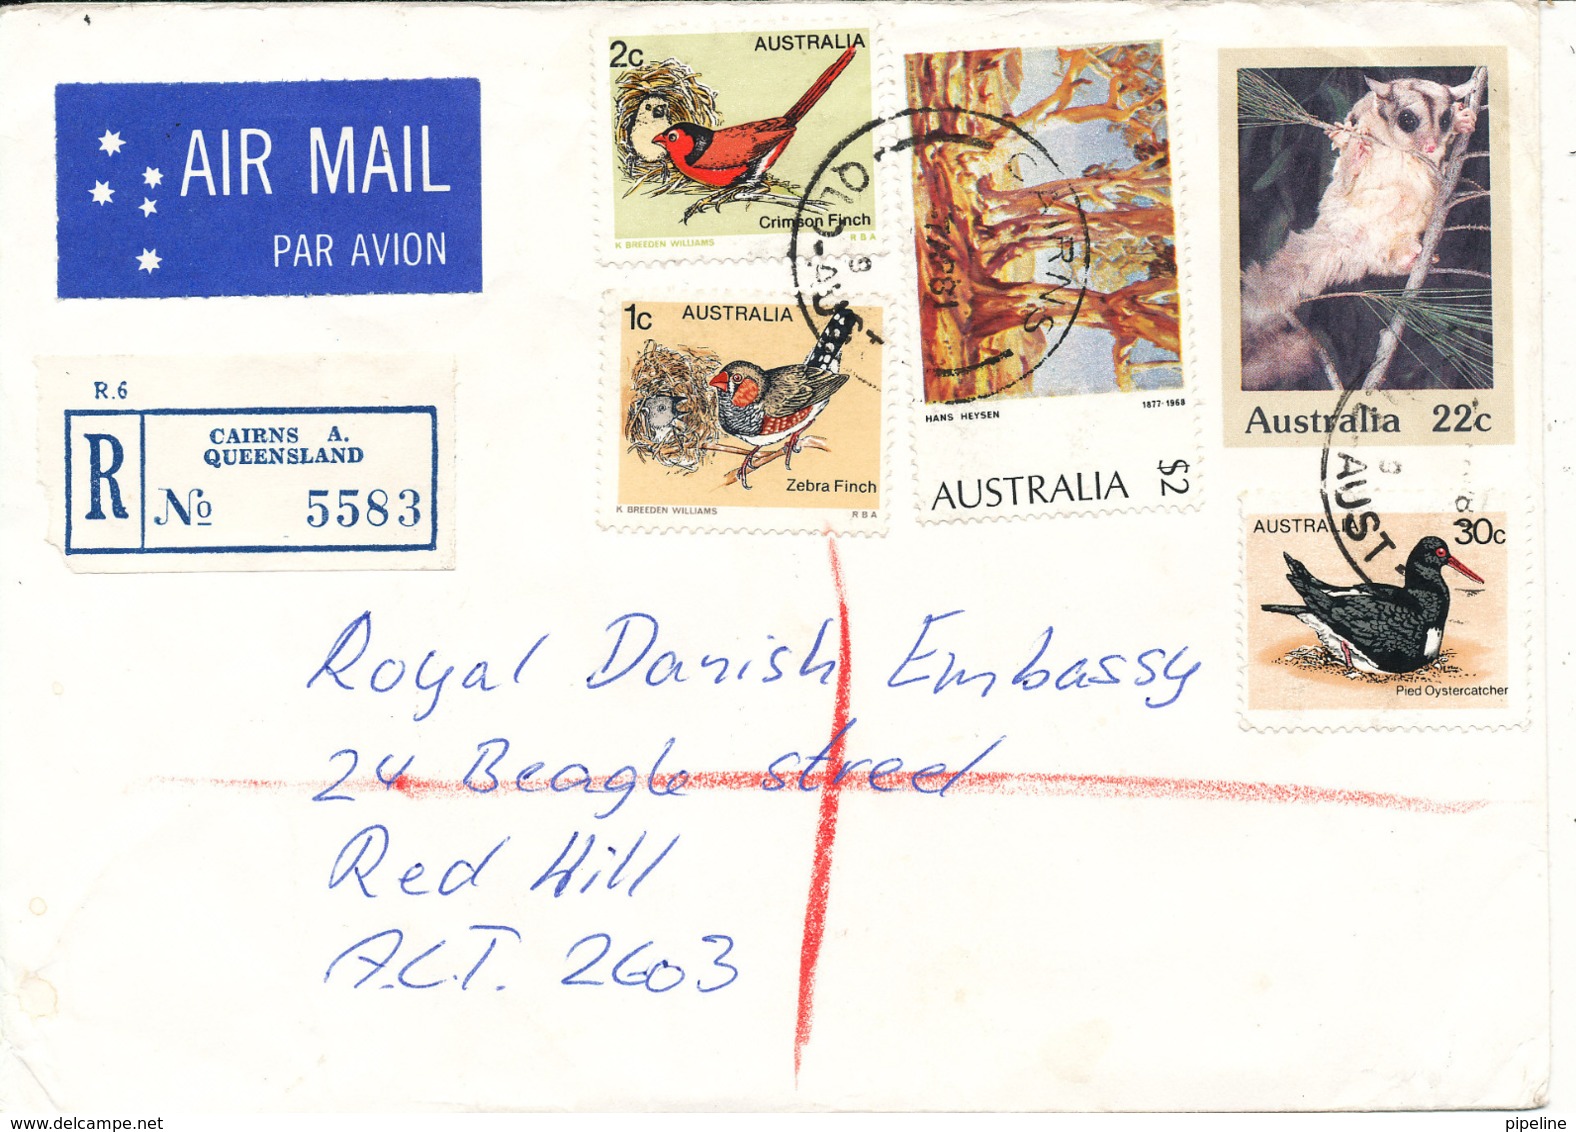 Australia Registered Uprated Postal Stationery Cover Cairns 7-4-1981 Sent To The Royal Danish Embassy - Covers & Documents